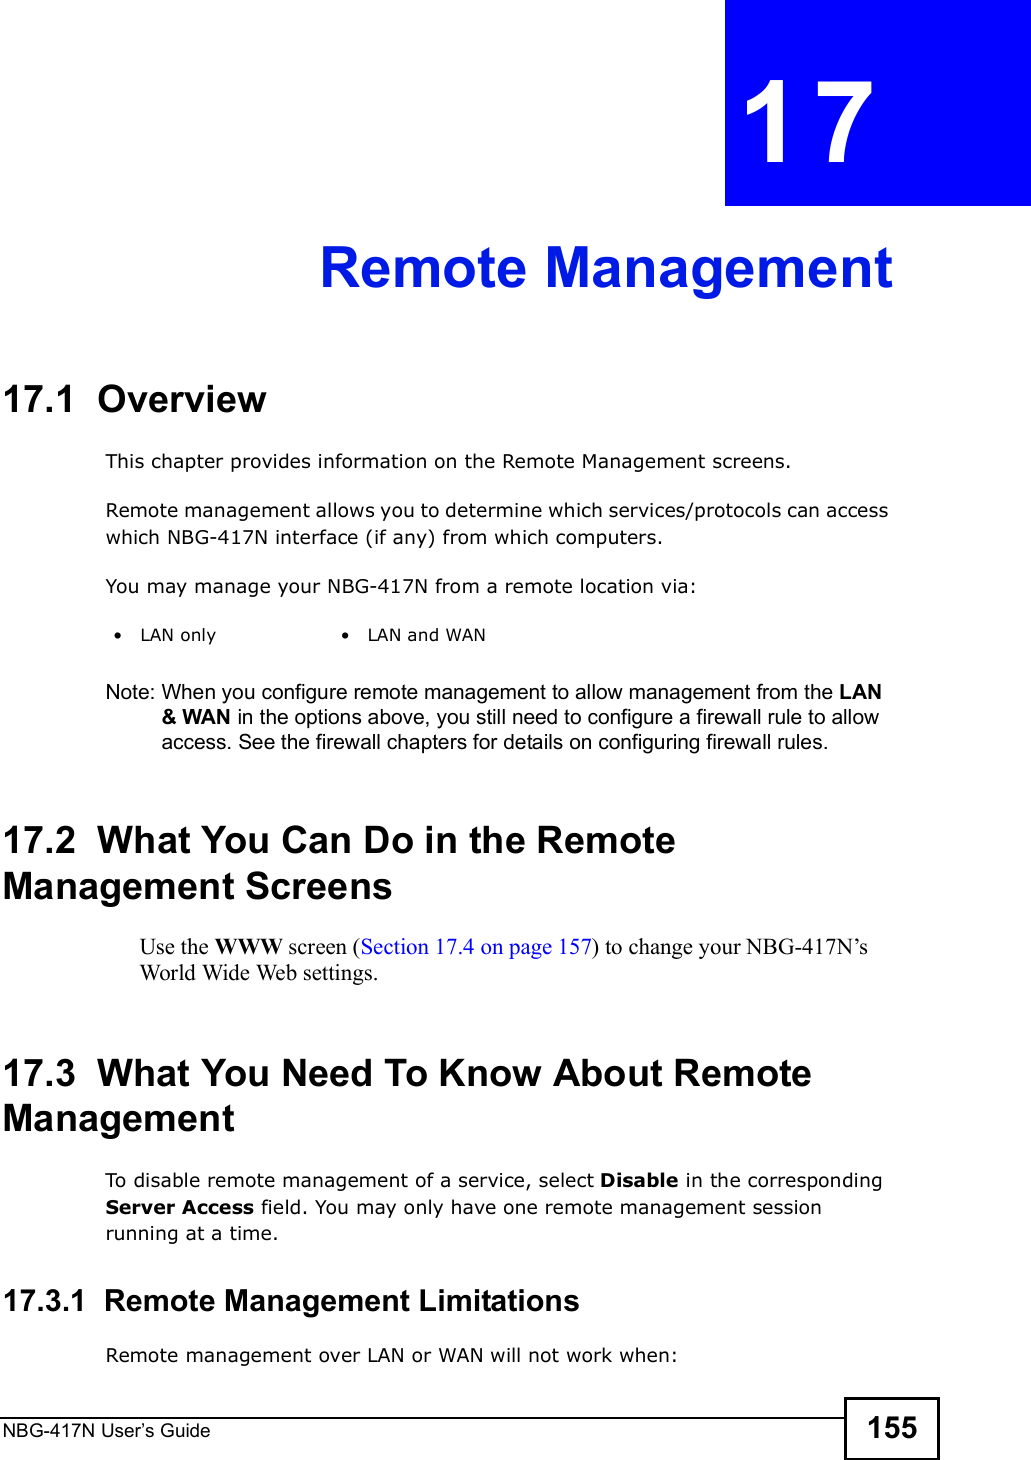 NBG-417N User s Guide 155CHAPTER  17 Remote Management17.1  OverviewThis chapter provides information on the Remote Management screens. Remote management allows you to determine which services/protocols can access which NBG-417N interface (if any) from which computers.You may manage your NBG-417N from a remote location via:Note: When you configure remote management to allow management from the LAN &amp; WAN in the options above, you still need to configure a firewall rule to allow access. See the firewall chapters for details on configuring firewall rules.17.2  What You Can Do in the Remote Management ScreensUse the WWW screen (Section 17.4 on page 157) to change your NBG-417N s World Wide Web settings.17.3  What You Need To Know About Remote ManagementTo disable remote management of a service, select Disable in the corresponding Server Access field. You may only have one remote management session running at a time. 17.3.1  Remote Management LimitationsRemote management over LAN or WAN will not work when: LAN only  LAN and WAN